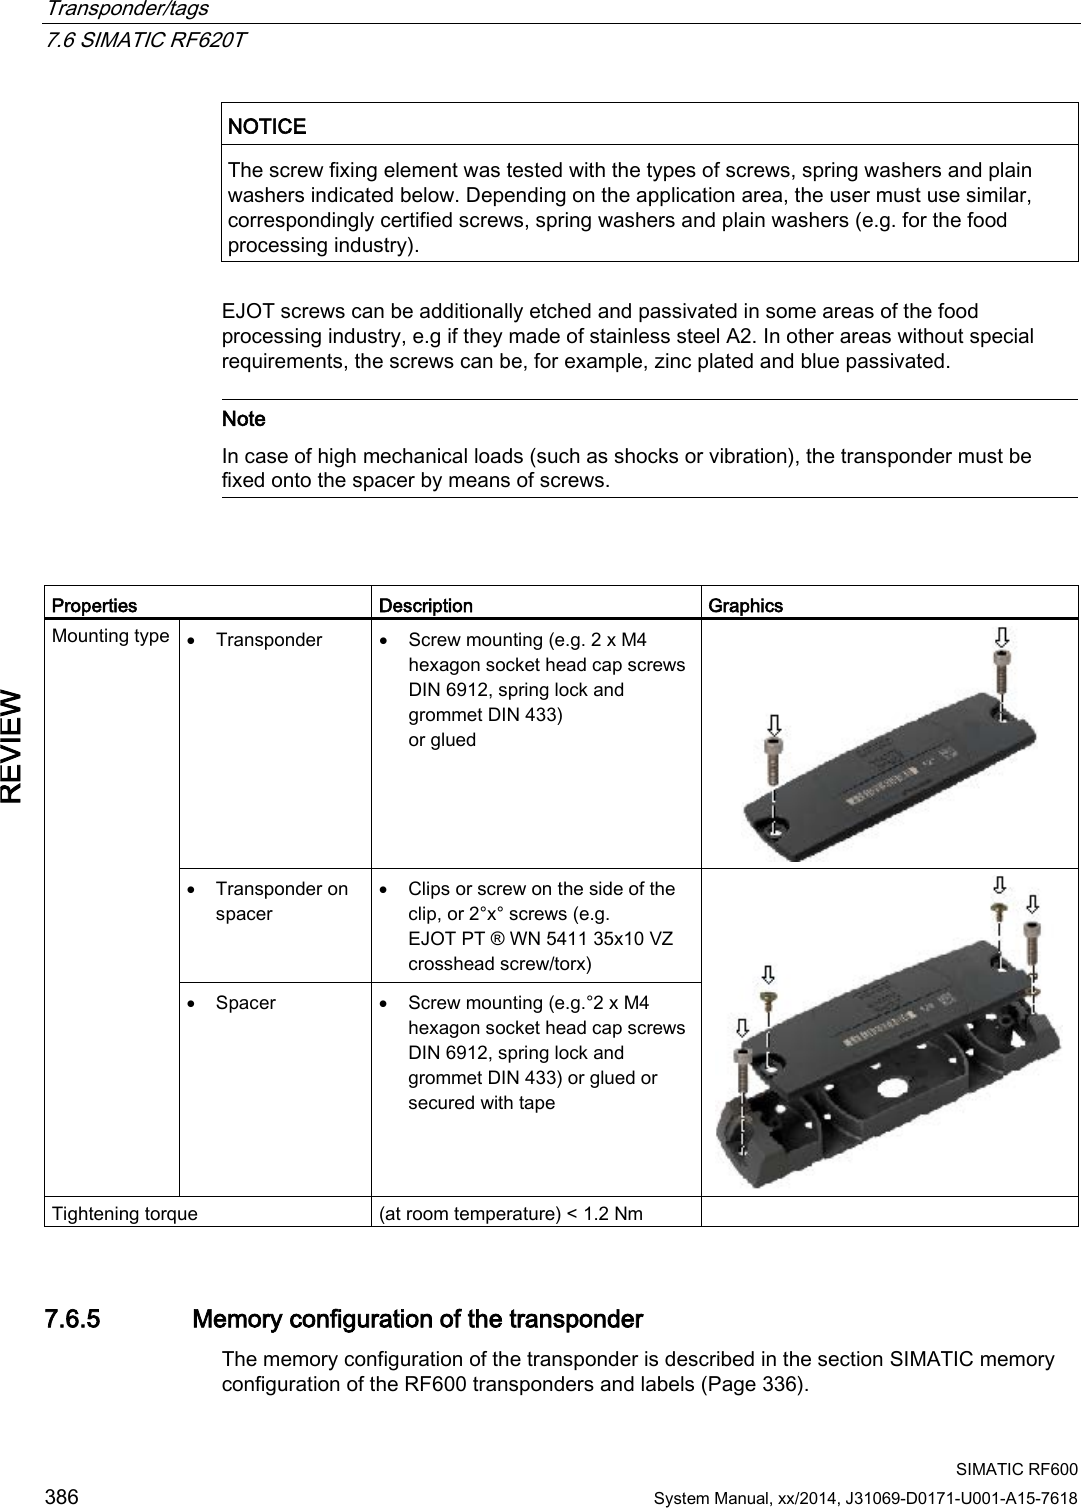 Transponder/tags   7.6 SIMATIC RF620T  SIMATIC RF600 386 System Manual, xx/2014, J31069-D0171-U001-A15-7618 REVIEW  NOTICE The screw fixing element was tested with the types of screws, spring washers and plain washers indicated below. Depending on the application area, the user must use similar, correspondingly certified screws, spring washers and plain washers (e.g. for the food processing industry).  EJOT screws can be additionally etched and passivated in some areas of the food processing industry, e.g if they made of stainless steel A2. In other areas without special requirements, the screws can be, for example, zinc plated and blue passivated.   Note In case of high mechanical loads (such as shocks or vibration), the transponder must be fixed onto the spacer by means of screws.    Properties Description Graphics Mounting type  • Transponder • Screw mounting (e.g. 2 x M4 hexagon socket head cap screws DIN 6912, spring lock and grommet DIN 433)  or glued   • Transponder on spacer • Clips or screw on the side of the clip, or 2°x° screws (e.g. EJOT PT ® WN 5411 35x10 VZ crosshead screw/torx)  • Spacer • Screw mounting (e.g.°2 x M4 hexagon socket head cap screws DIN 6912, spring lock and grommet DIN 433) or glued or secured with tape Tightening torque (at room temperature) &lt; 1.2 Nm  7.6.5 Memory configuration of the transponder The memory configuration of the transponder is described in the section SIMATIC memory configuration of the RF600 transponders and labels (Page 336). 